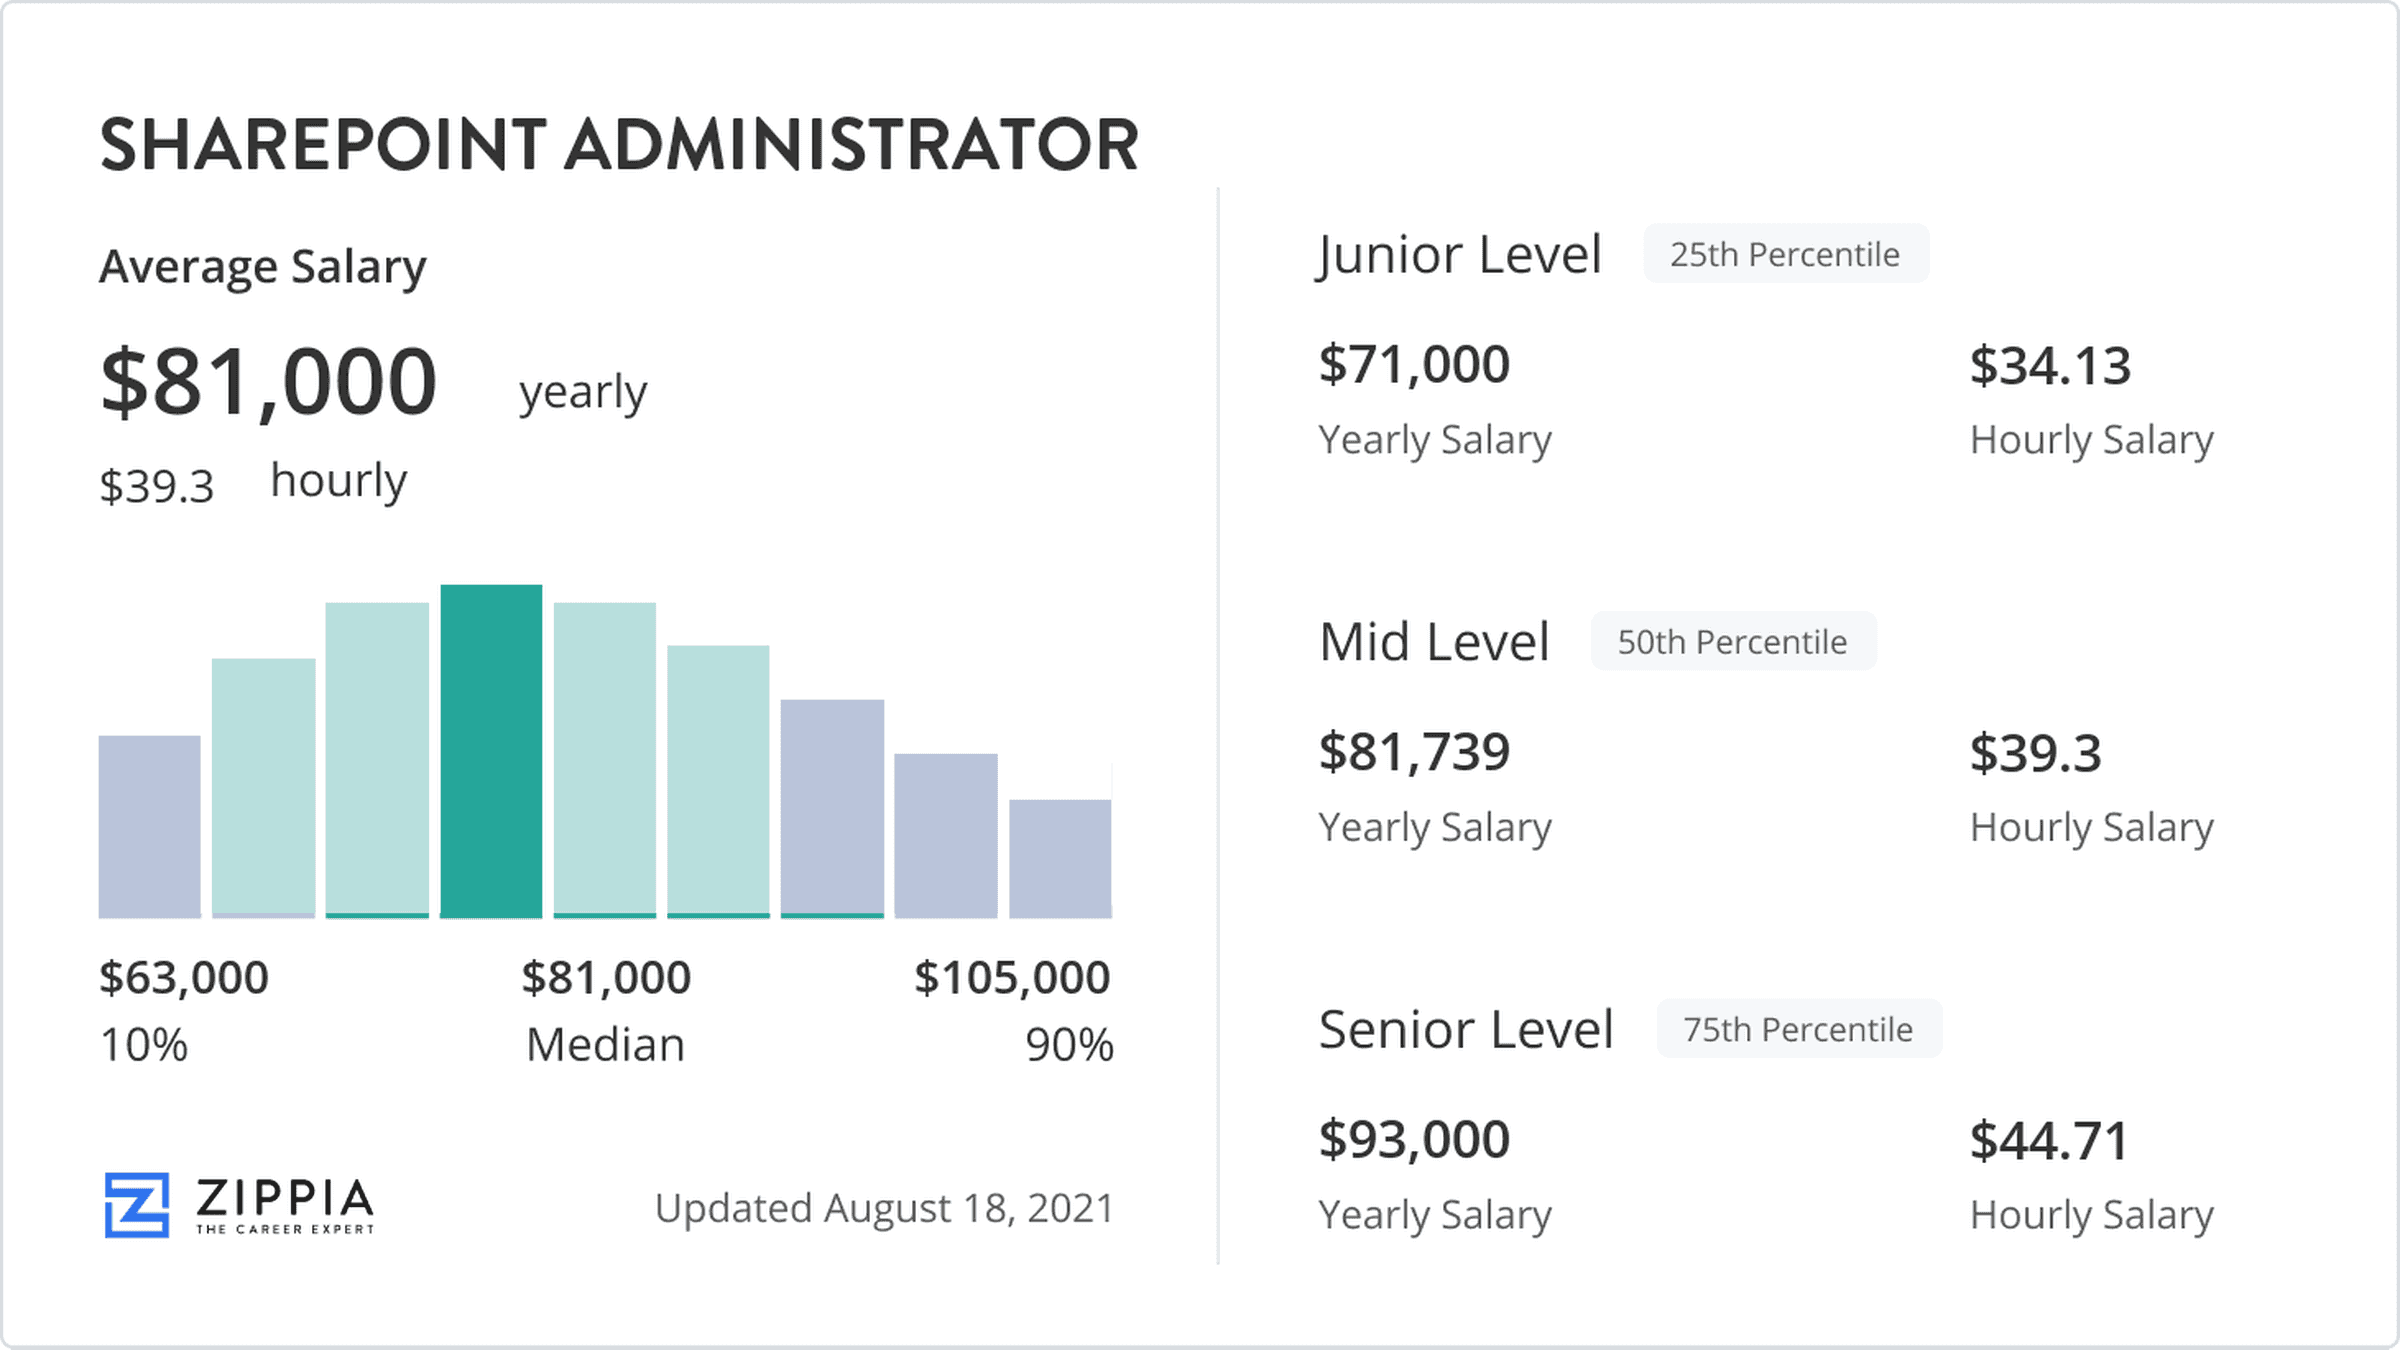 How Much Does A Sharepoint Administrator Make?